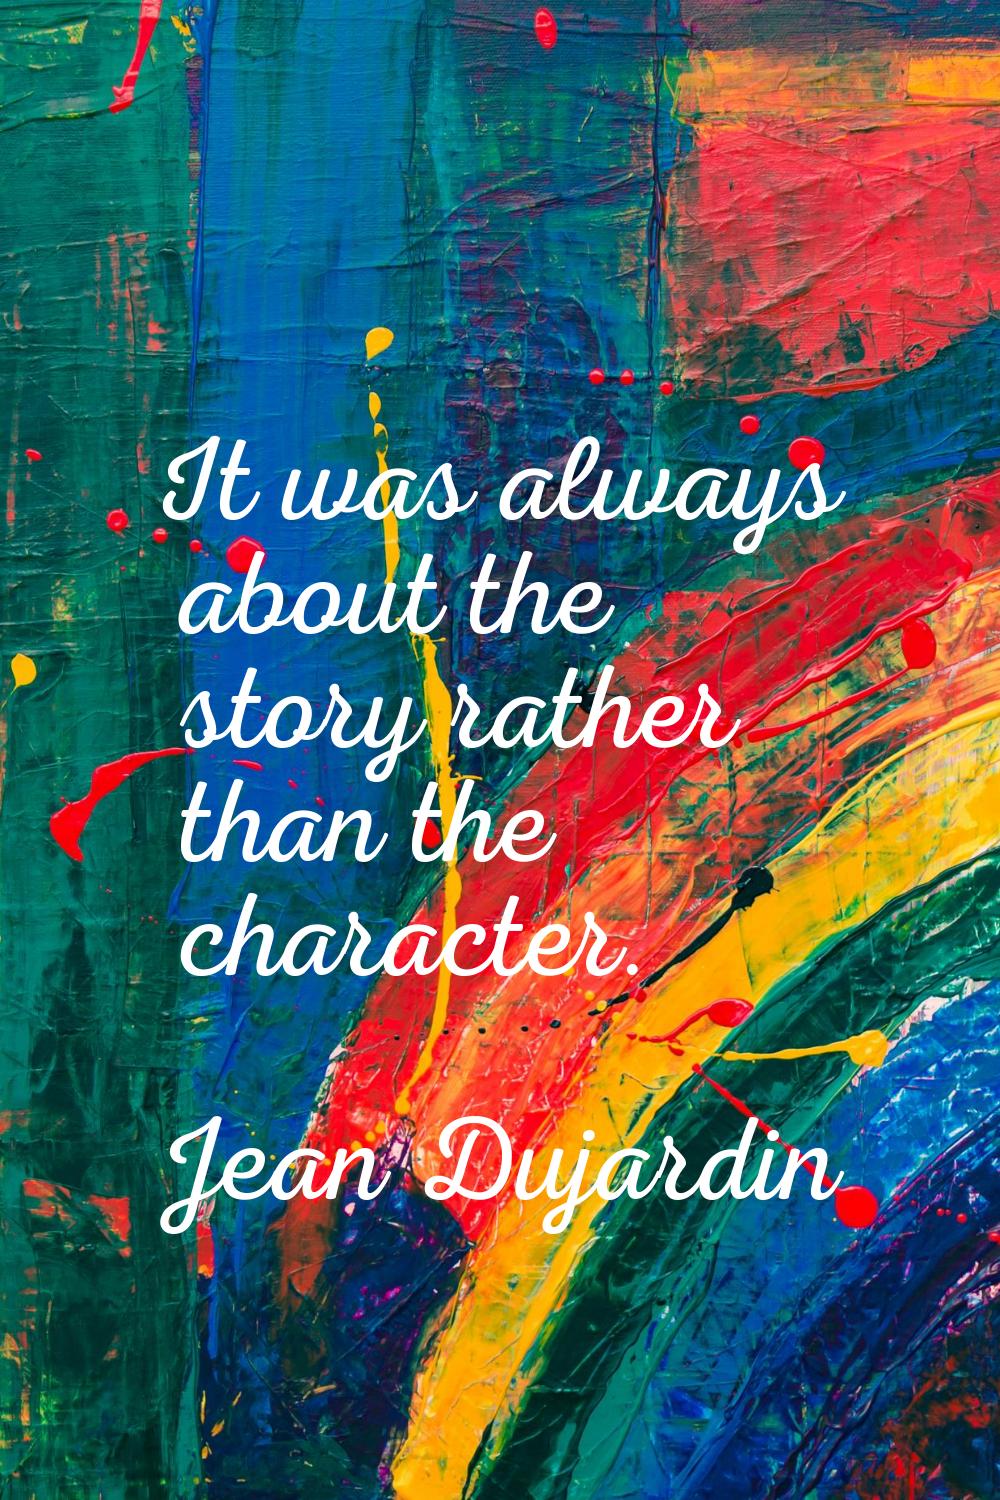 It was always about the story rather than the character.